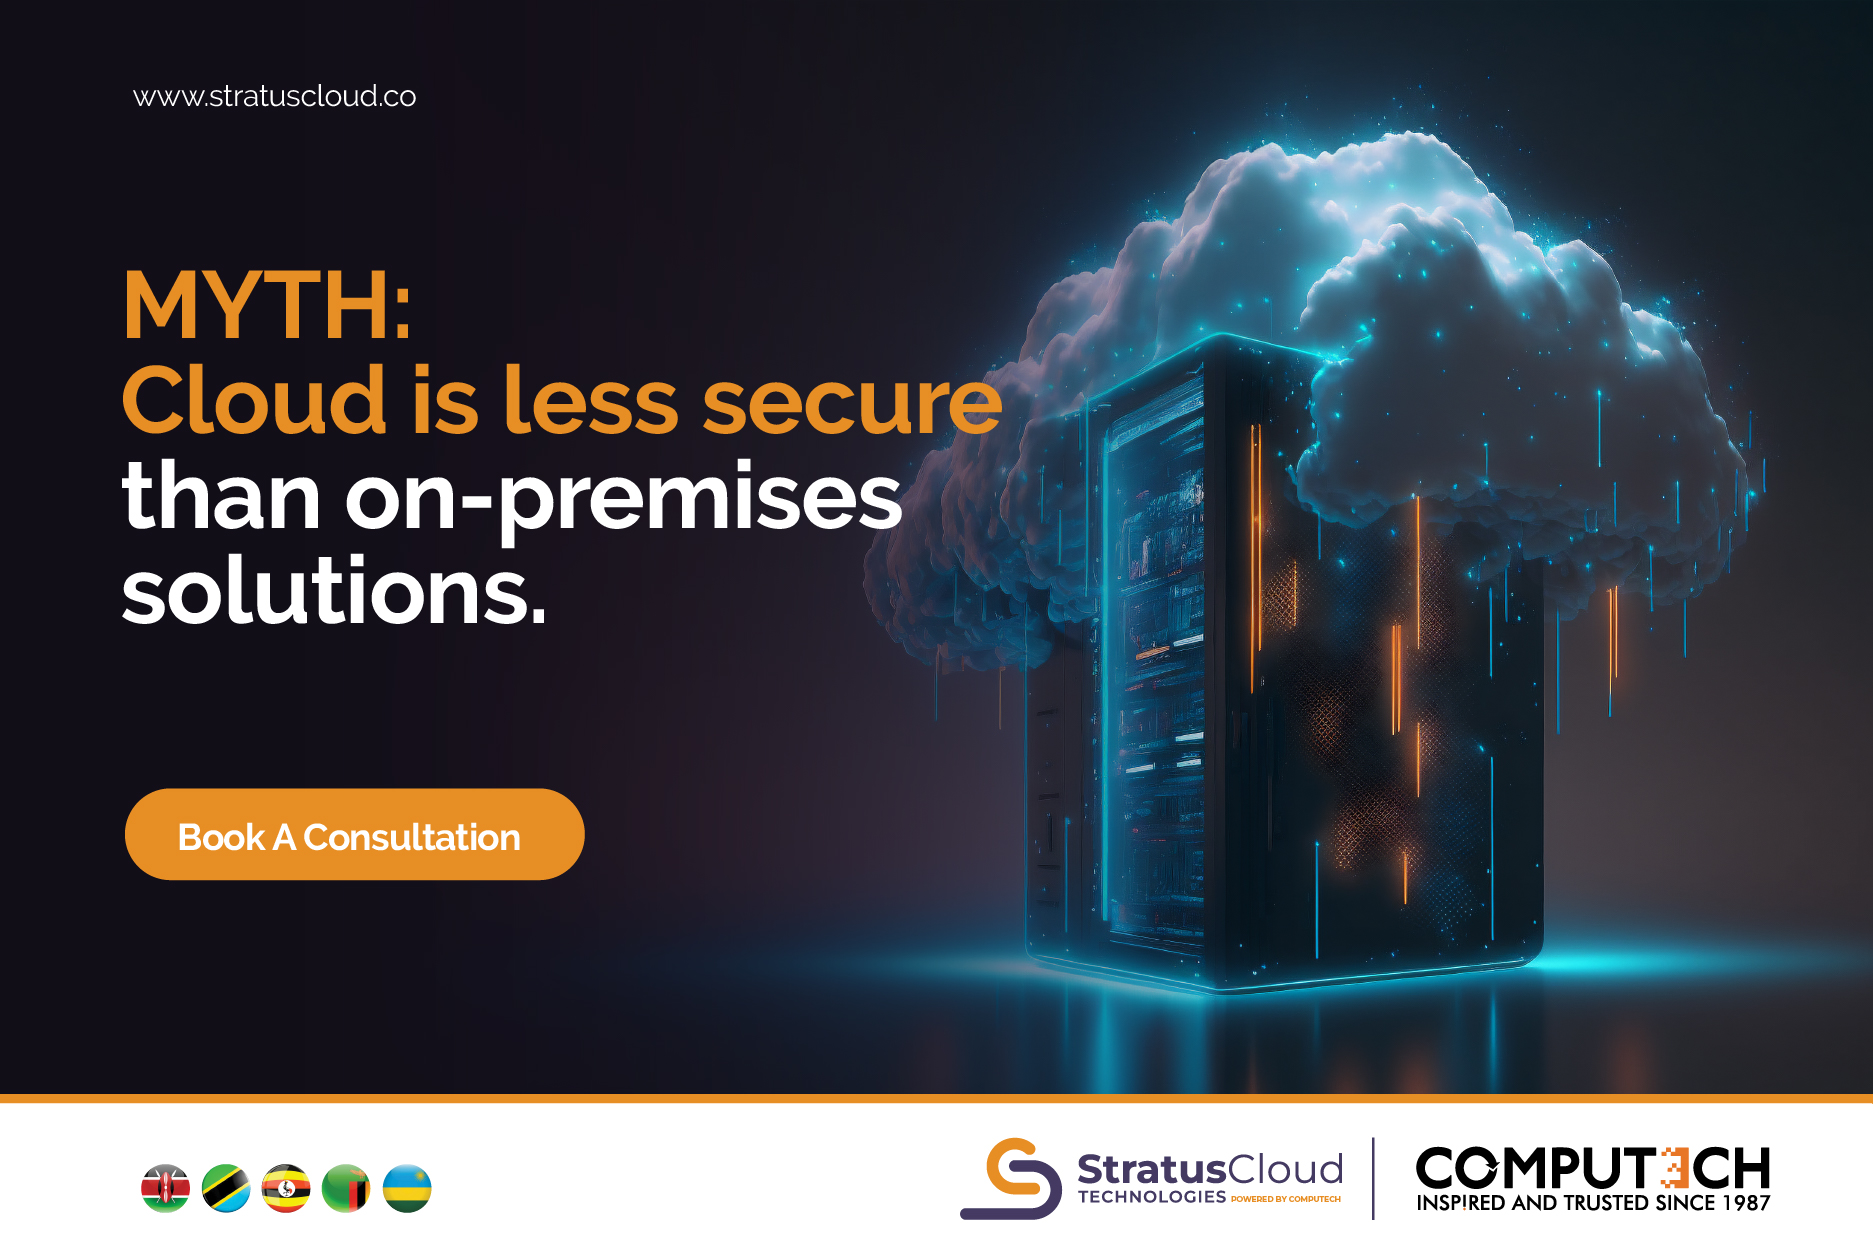 MYTH: The cloud is less secure than on premises solutions.